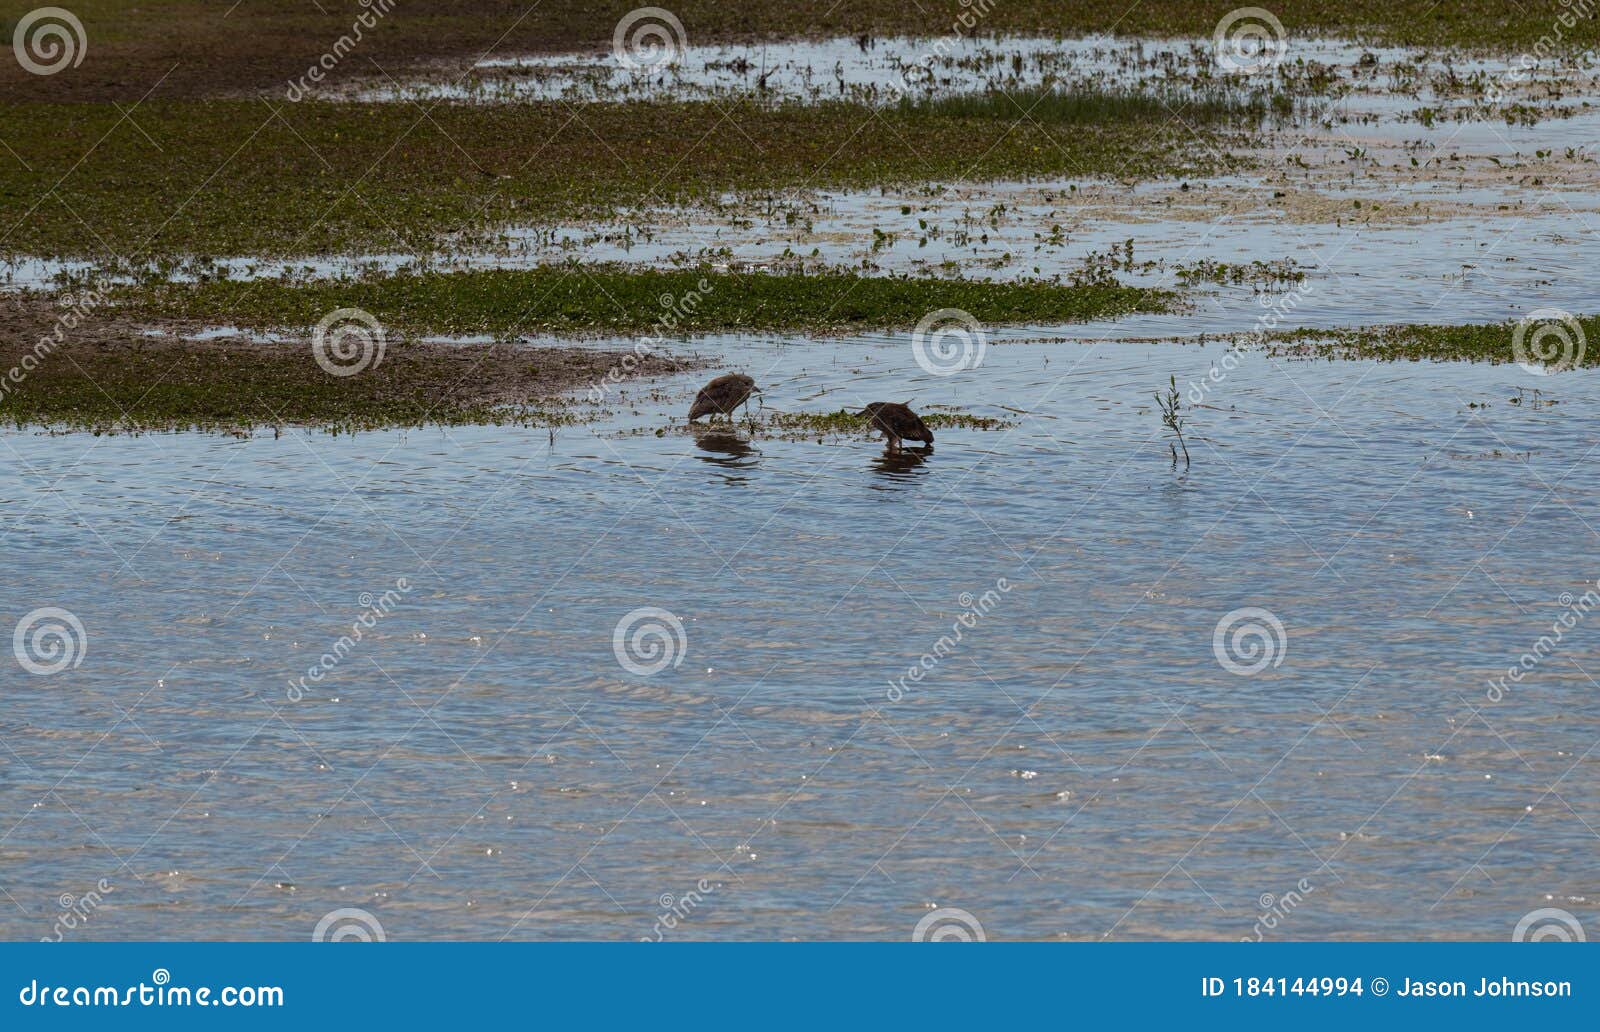 two birds swimming in a pond